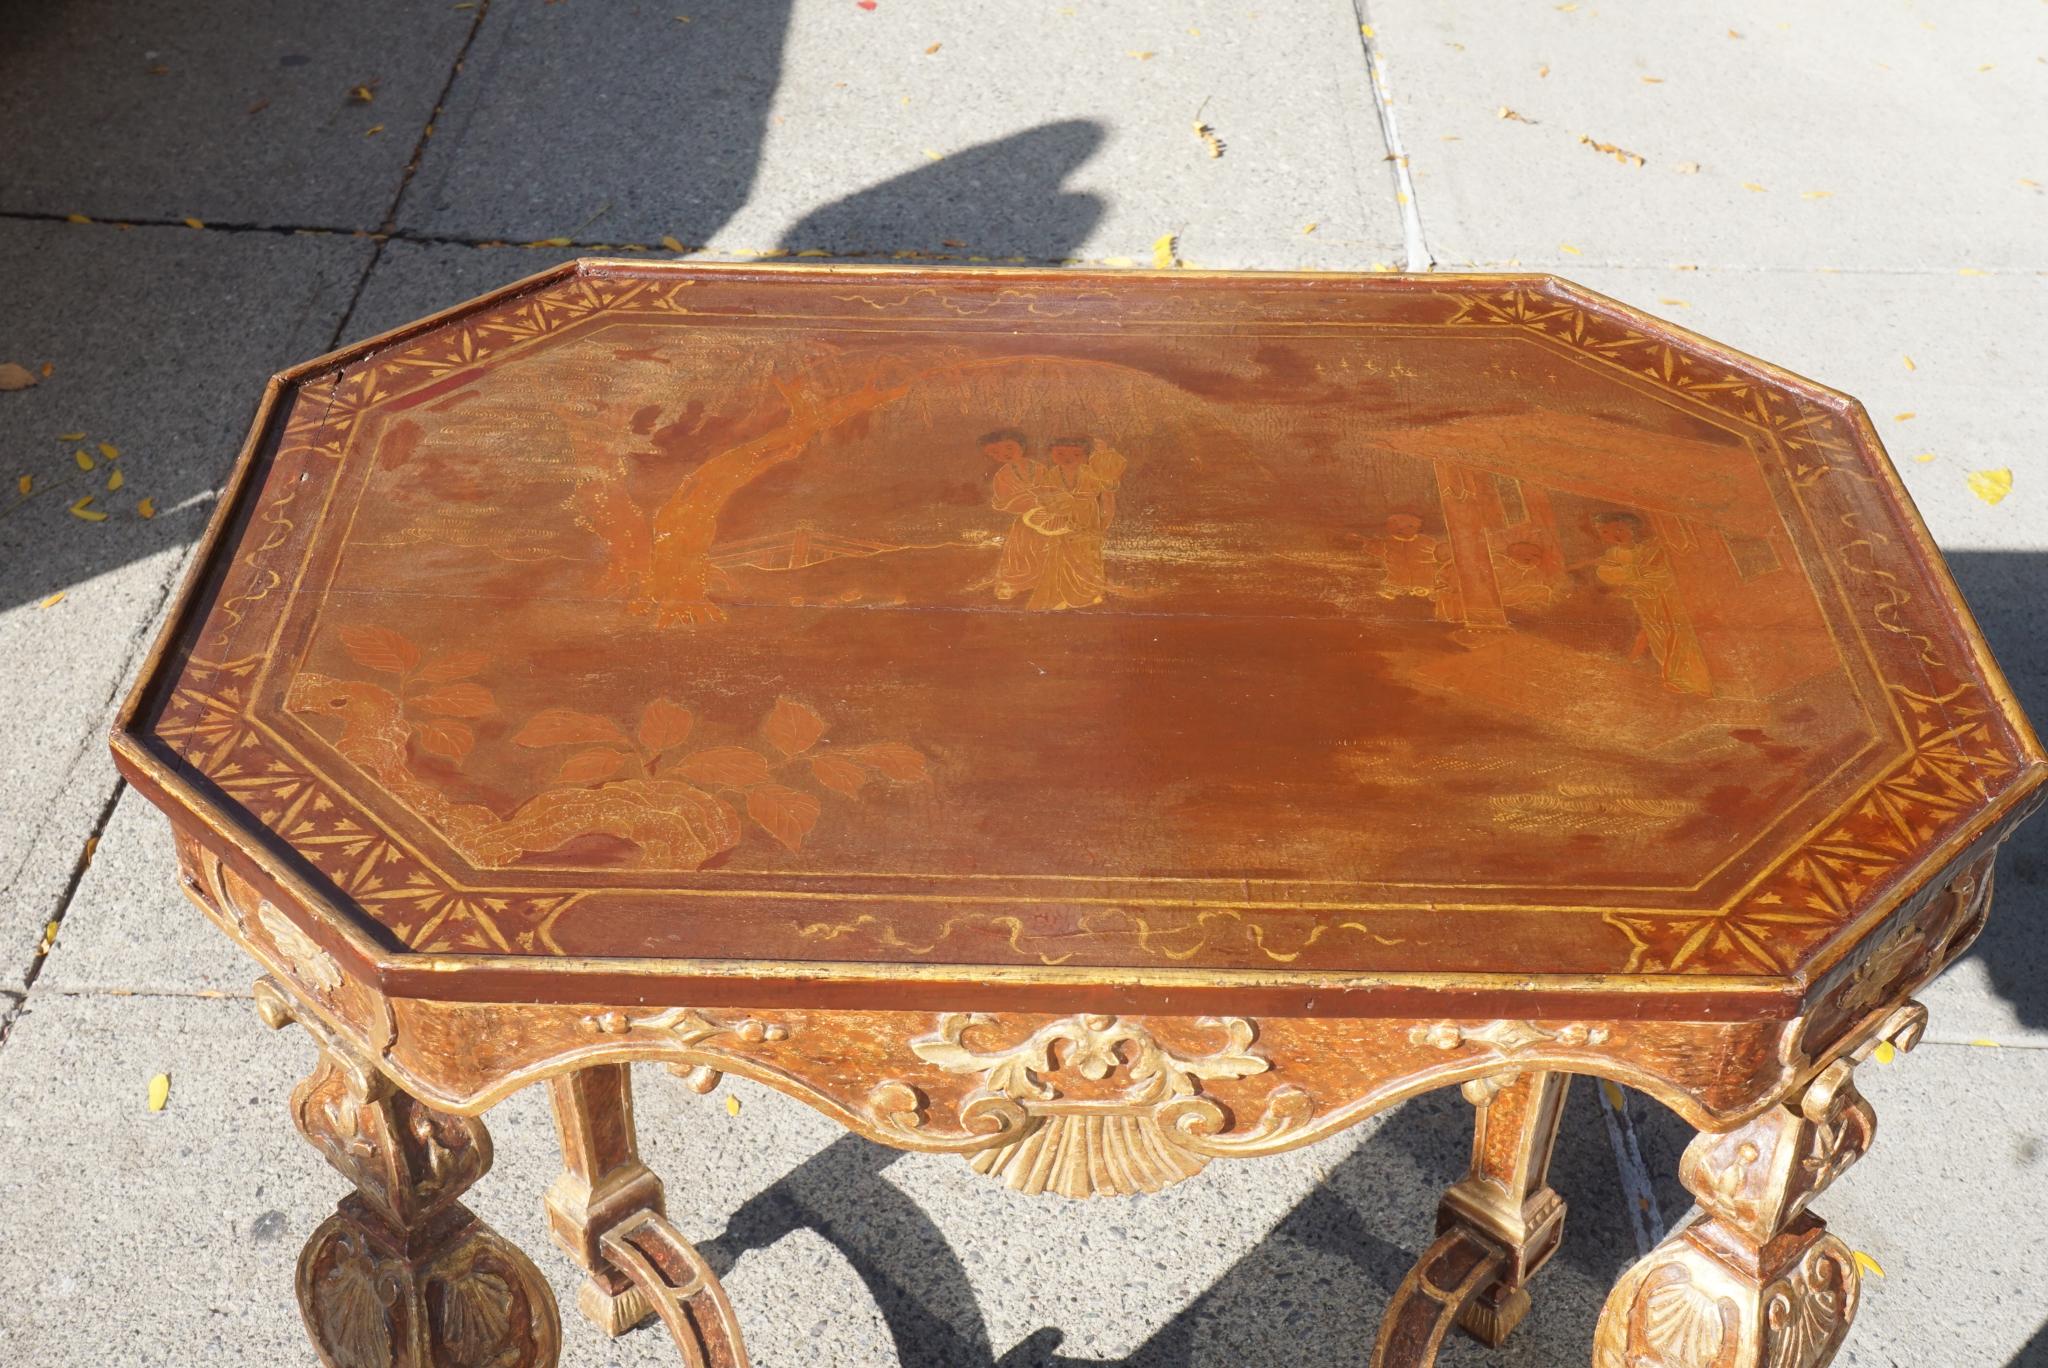 Wood Period Baroque Painted and Gilt Italian Table From the Estate of Cynthia Phipps For Sale